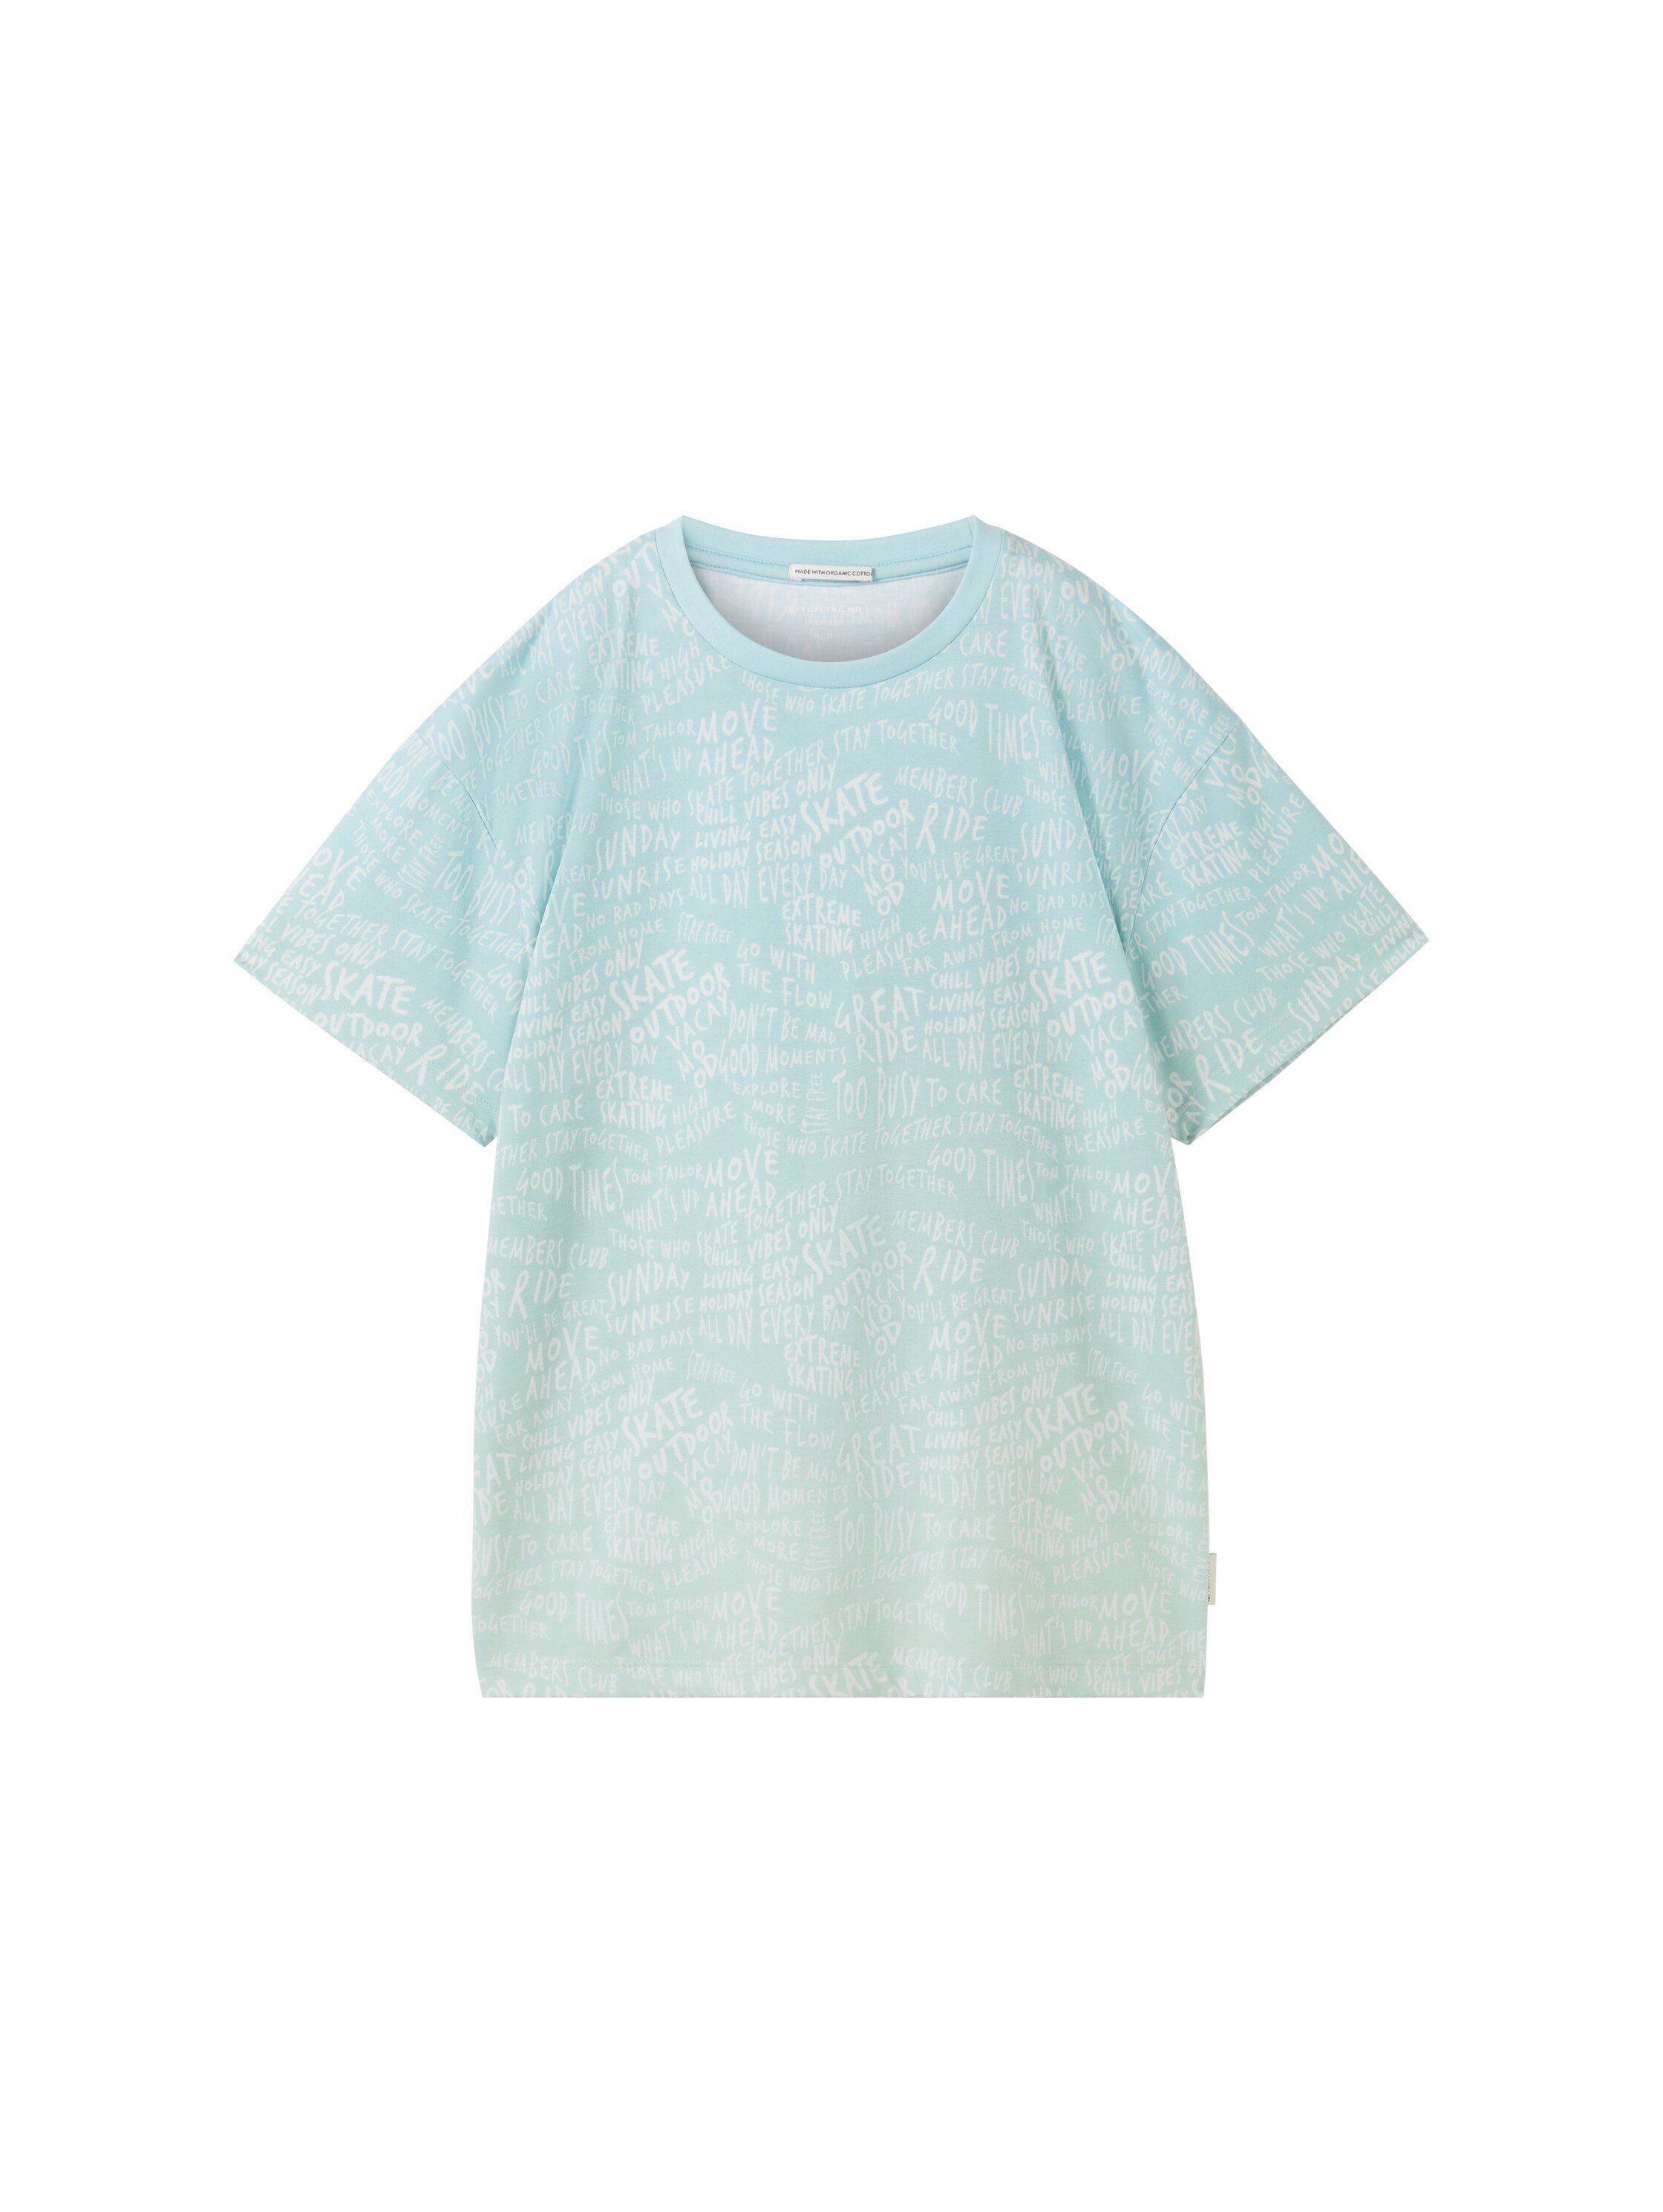 TOM TAILOR T-Shirt mit All-over Print